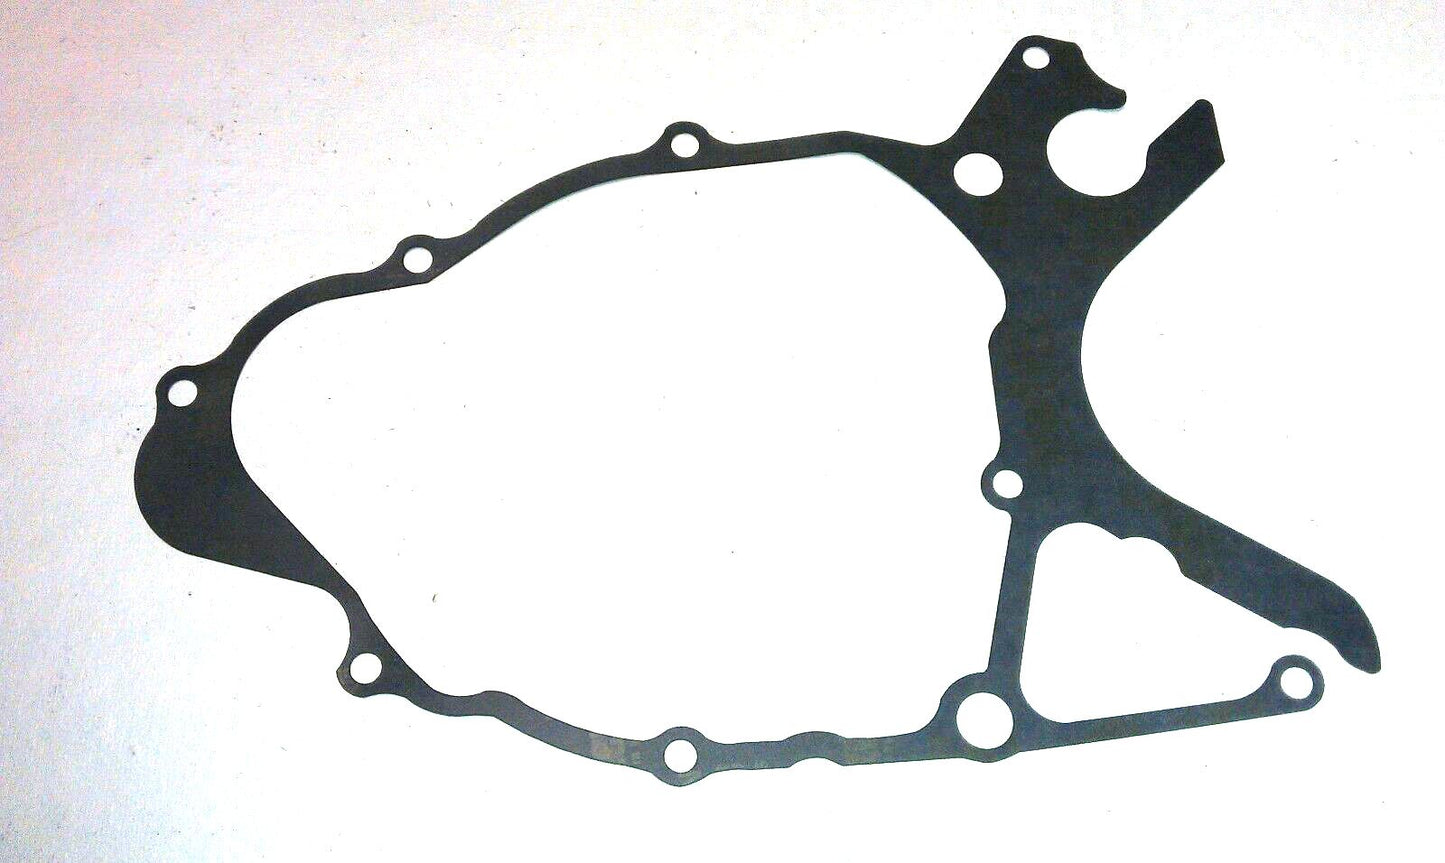 YAMAHA TW200  Stater Cover Gasket  2JX-15451-00 / 3AW-15451-00